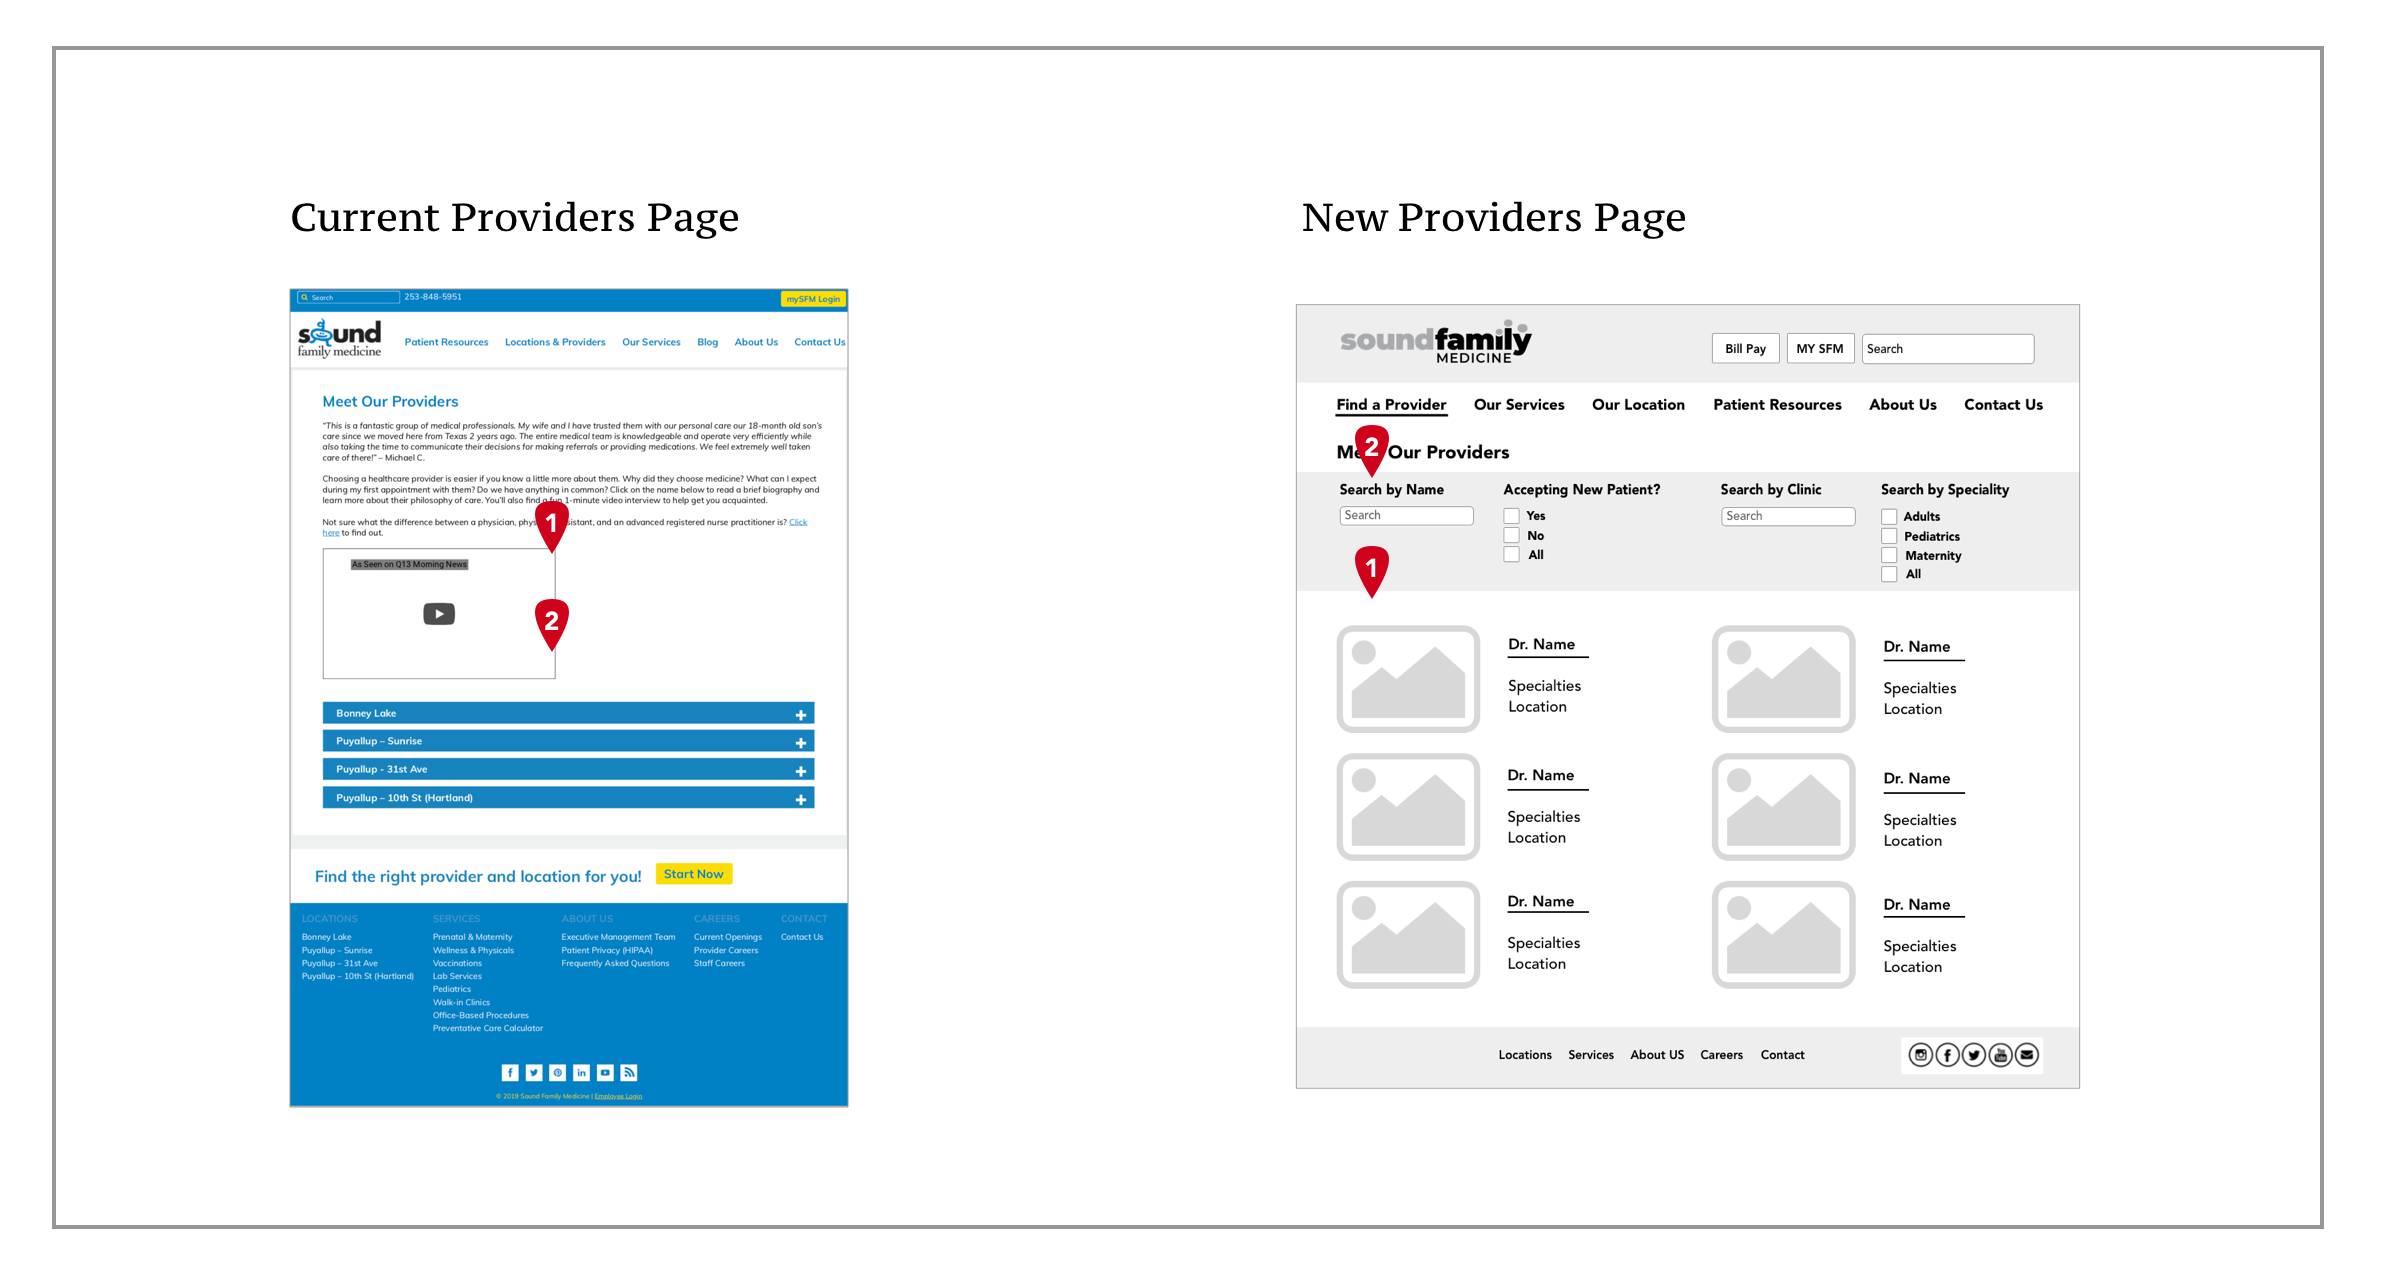 Highlights of Primary Iterations - Current vs. New Provider Page 